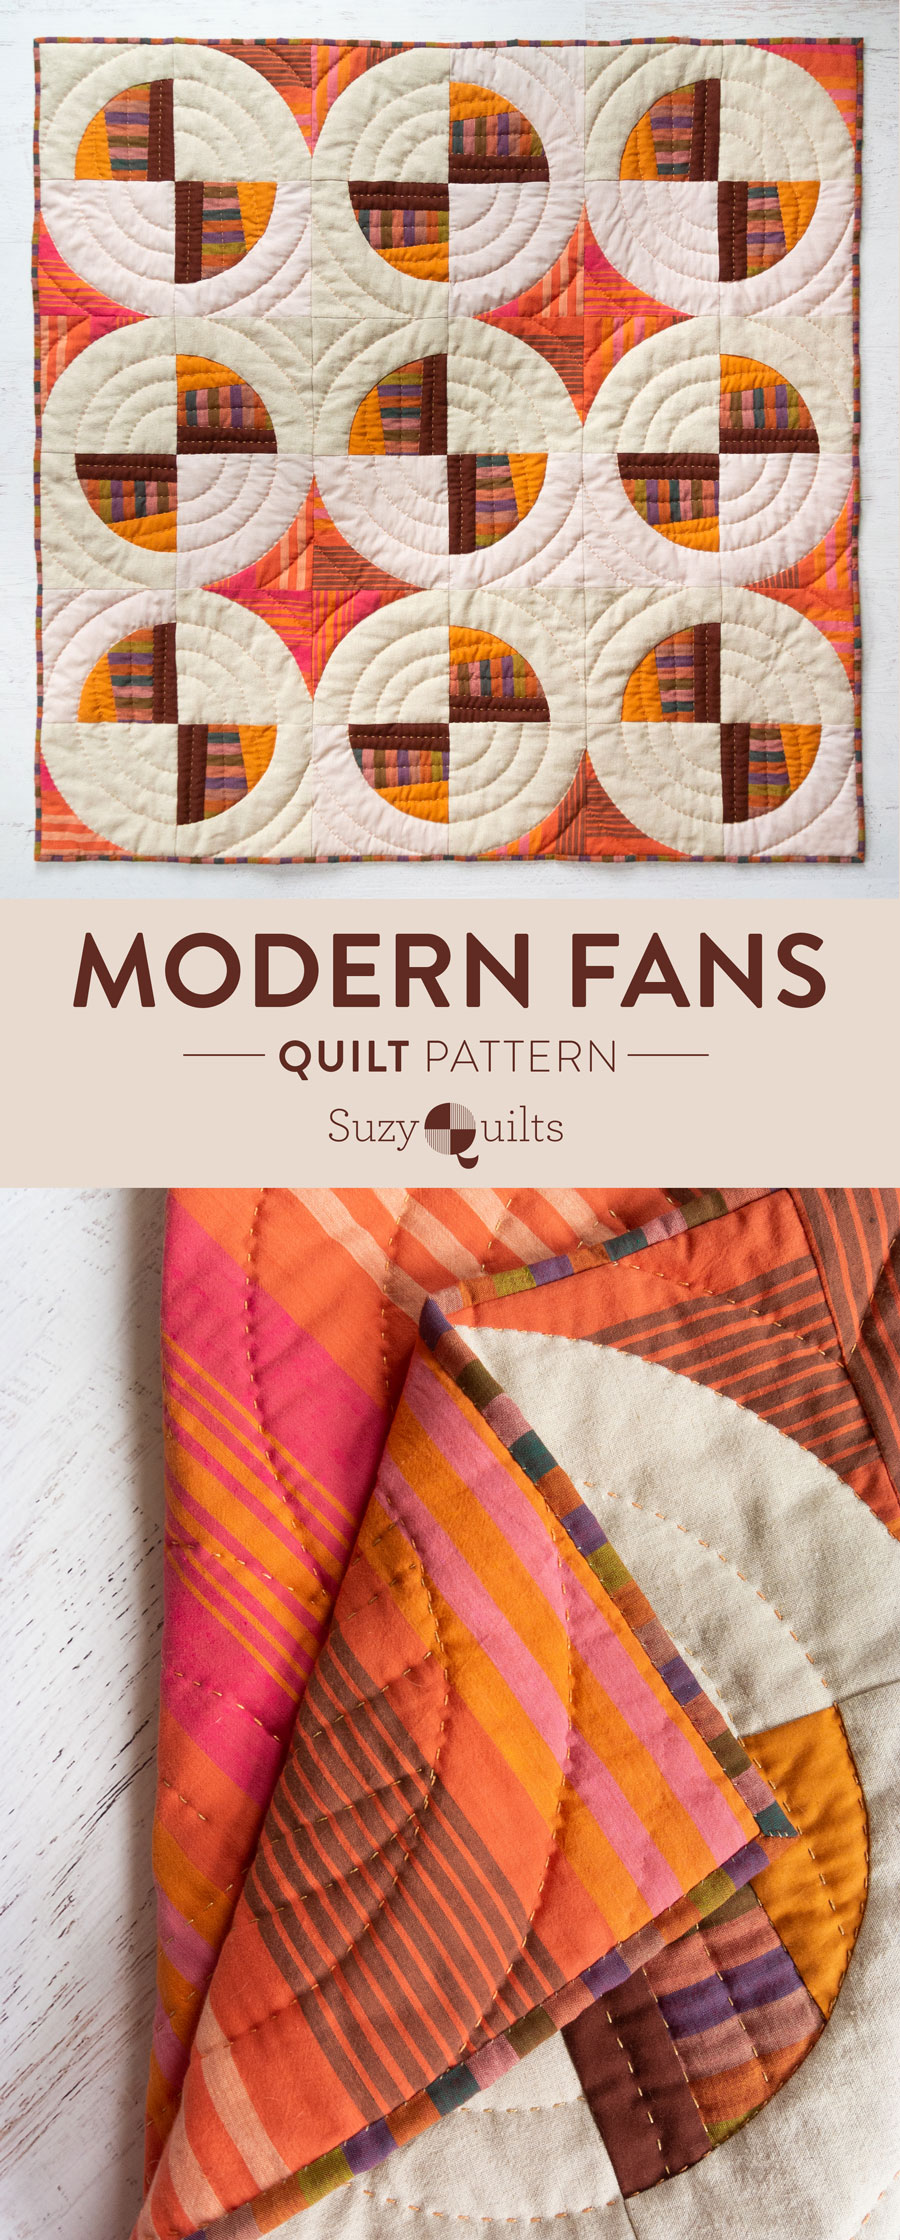 Modern Fans is a bold, contemporary quilt pattern that includes king, queen, twin, throw and baby quilt sizes as well as a video tutorial!